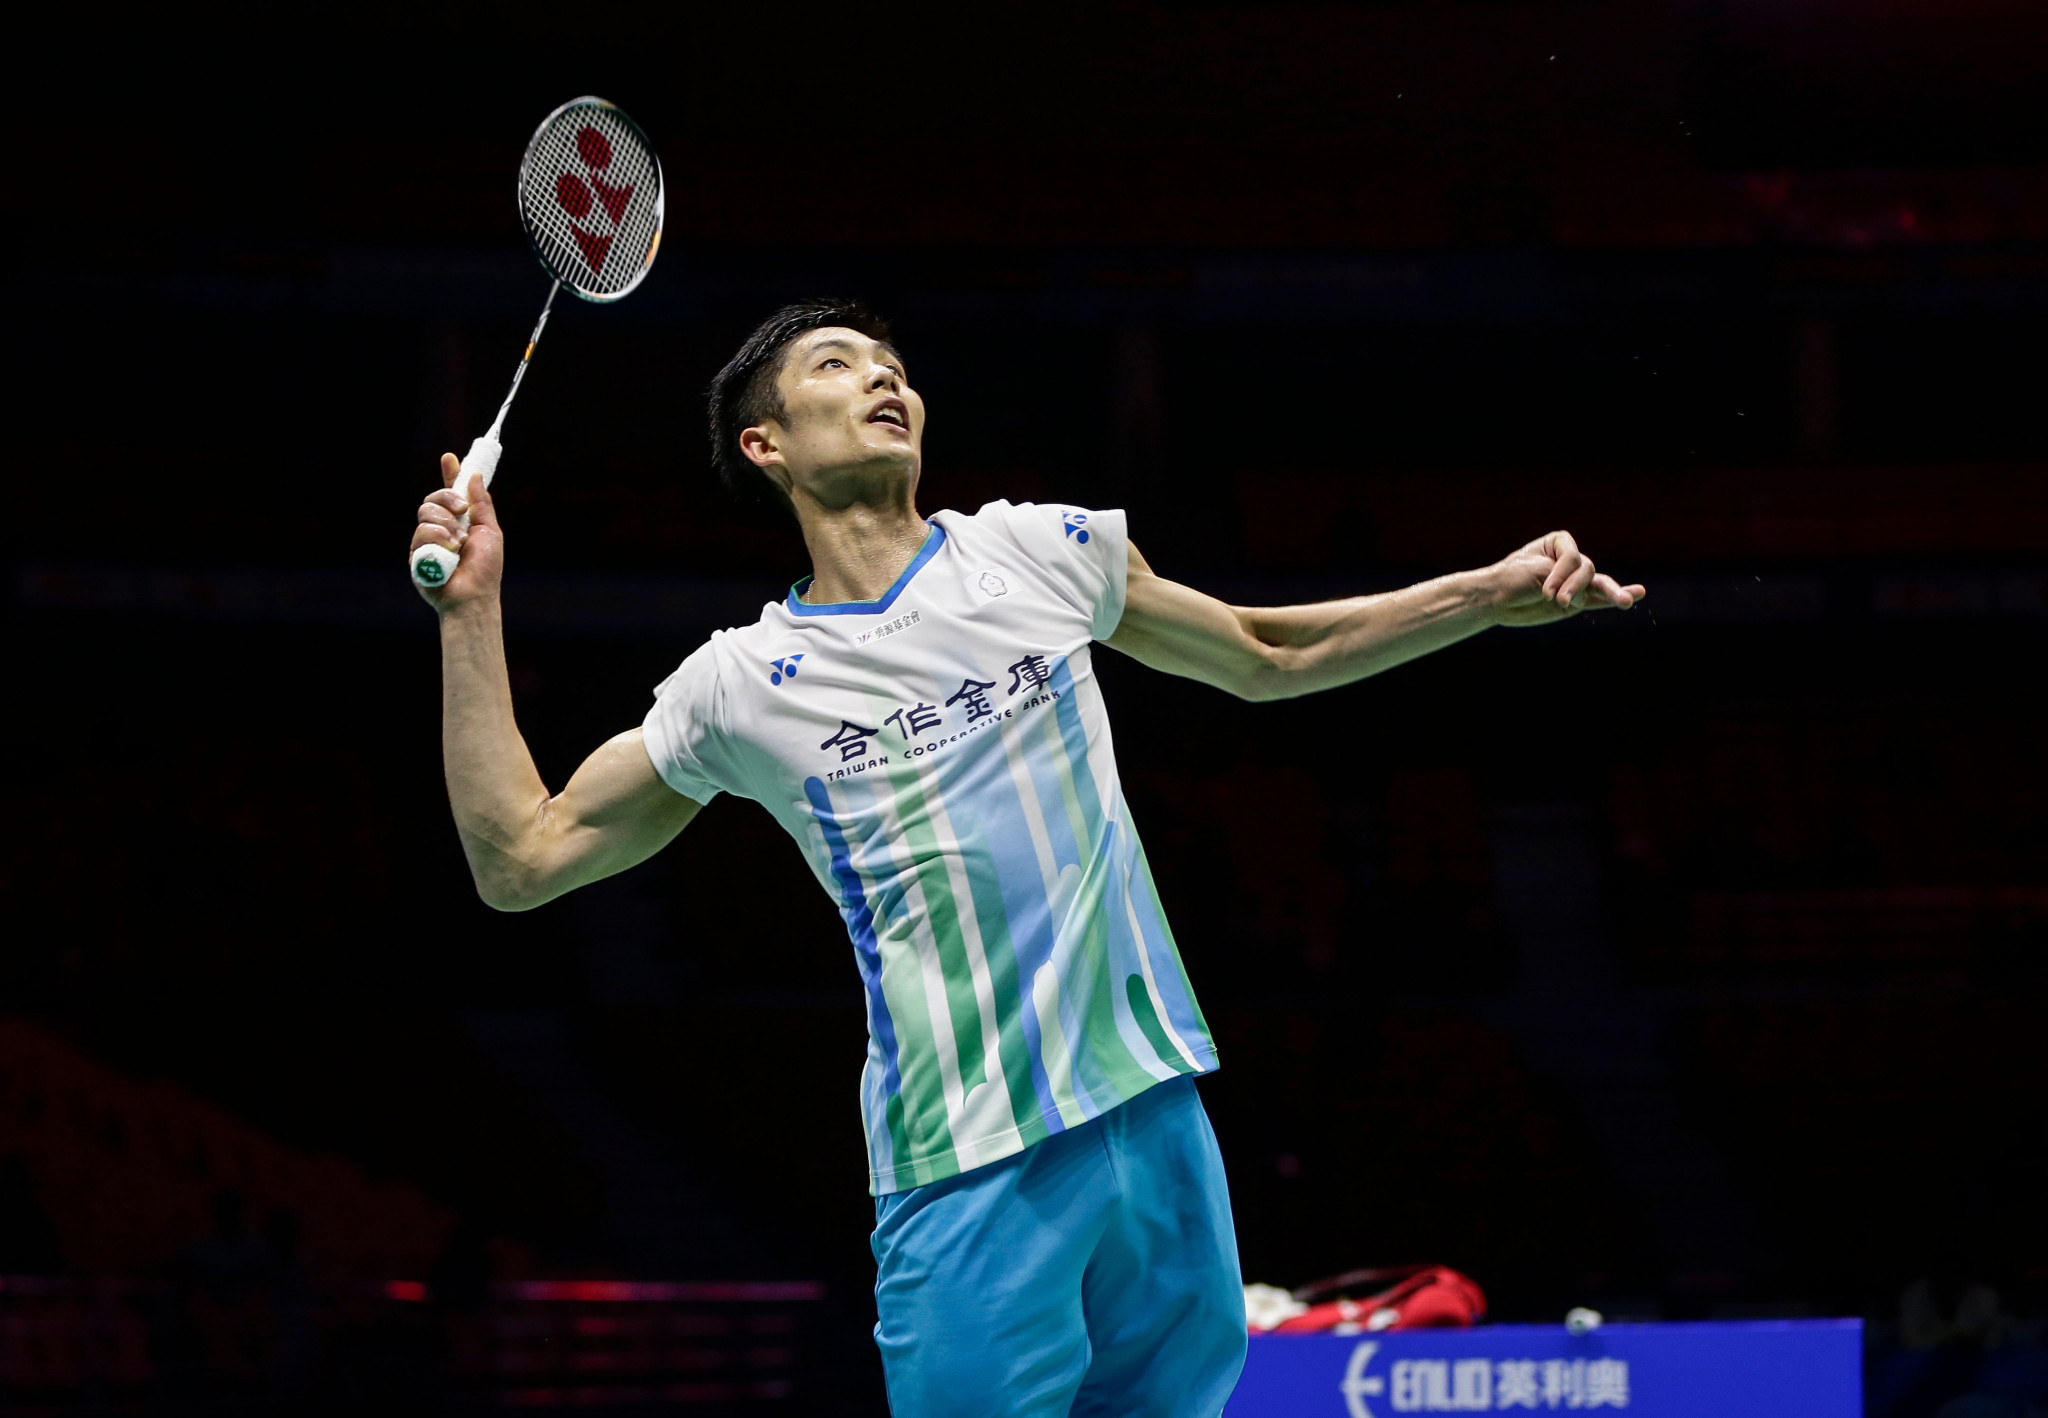 Chou Tien Chen of Chinese Taipei, world ranked three, is men's singles top seed at the BWF Australian Open that starts i Sydney tomorrow ©Getty Images